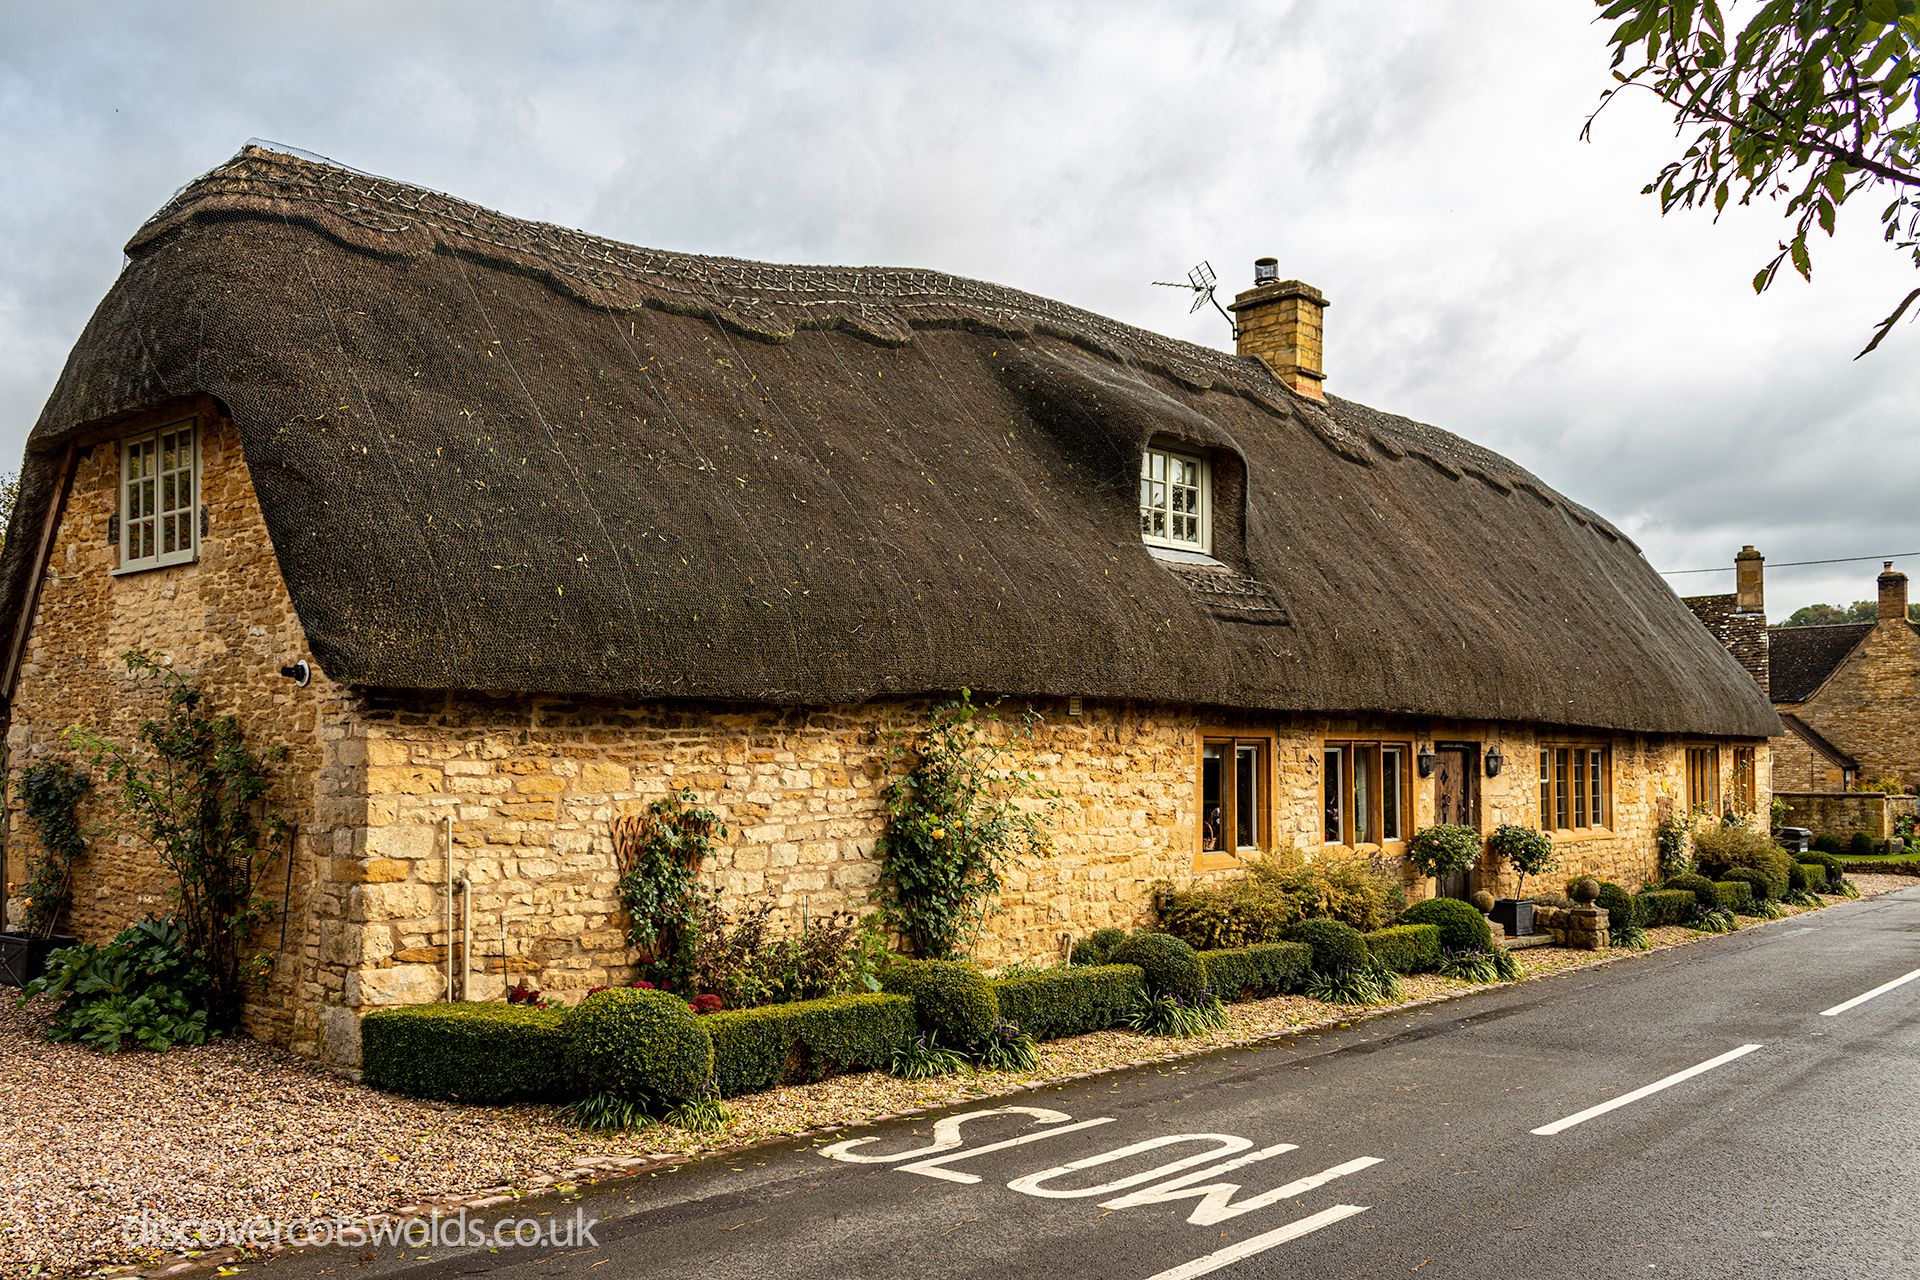 Thatched cottage in the Cotswolds village of Broad Campden